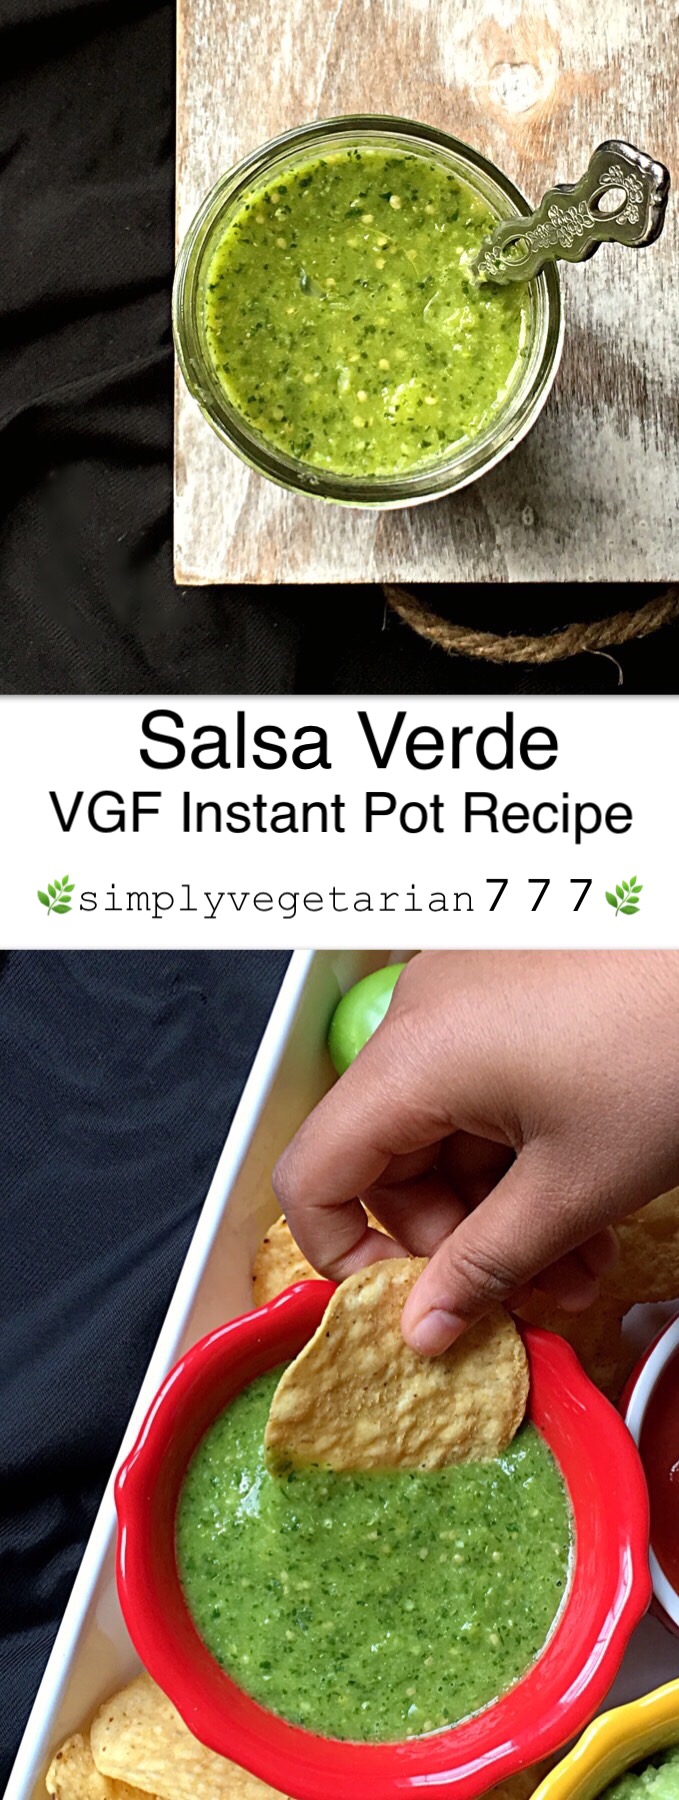 Salsa Verde Instant Pot Recipe is a finger-licking Mexican Sauce made with simplest ingredients. It is super easy to make in Instant Pot and is full of blasting flavors. IIt goes great with Nachos, Burritos, Fajitas, Tex Mex Bowls and more. #sauce #salsaverde #greensalsa #instantpotrecipe #mexican #mexicansauce 